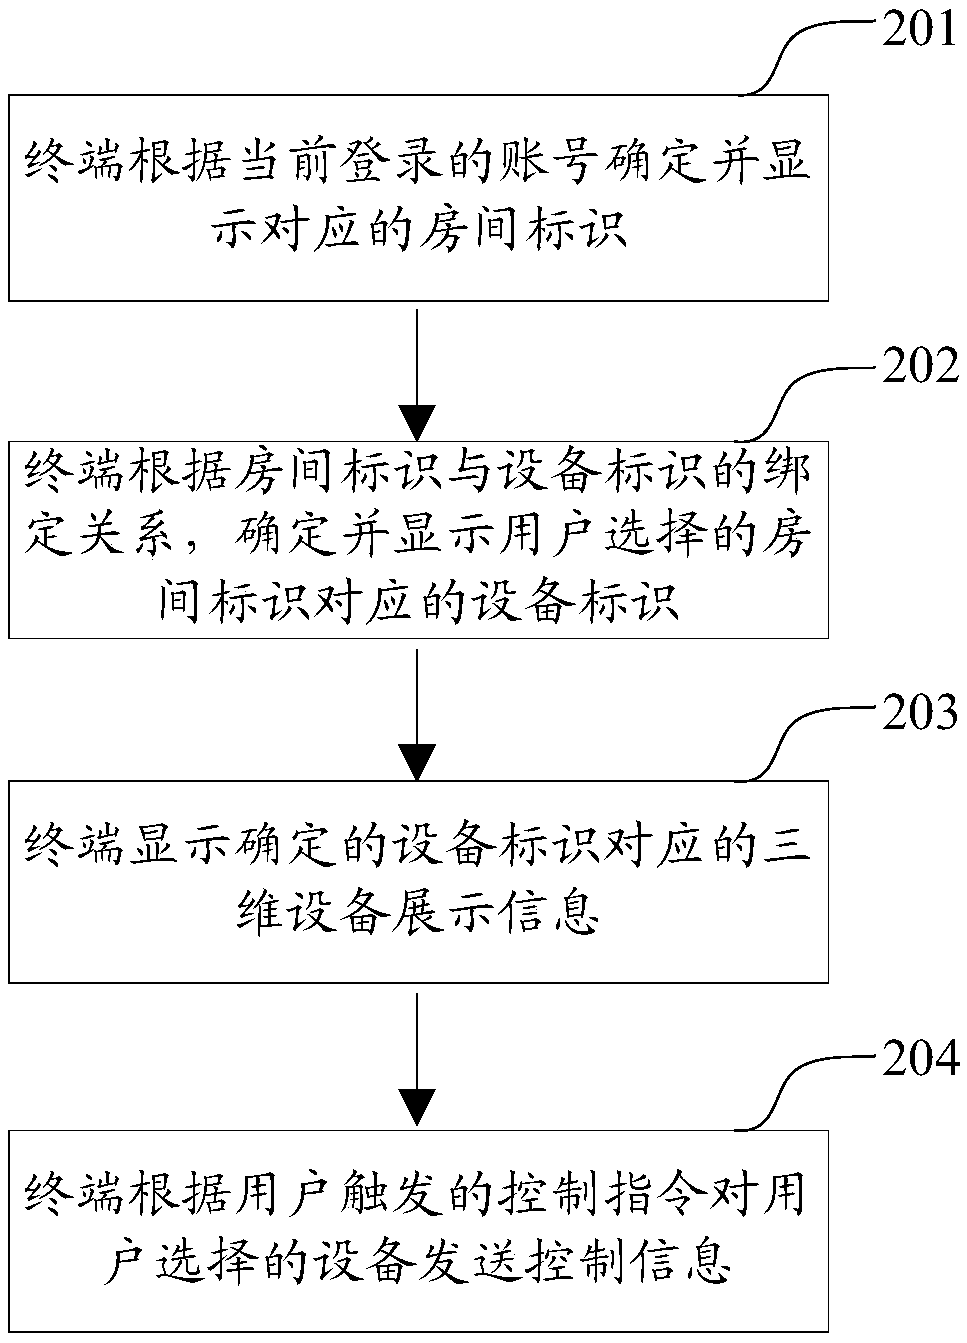 Method and device for management of household appliances